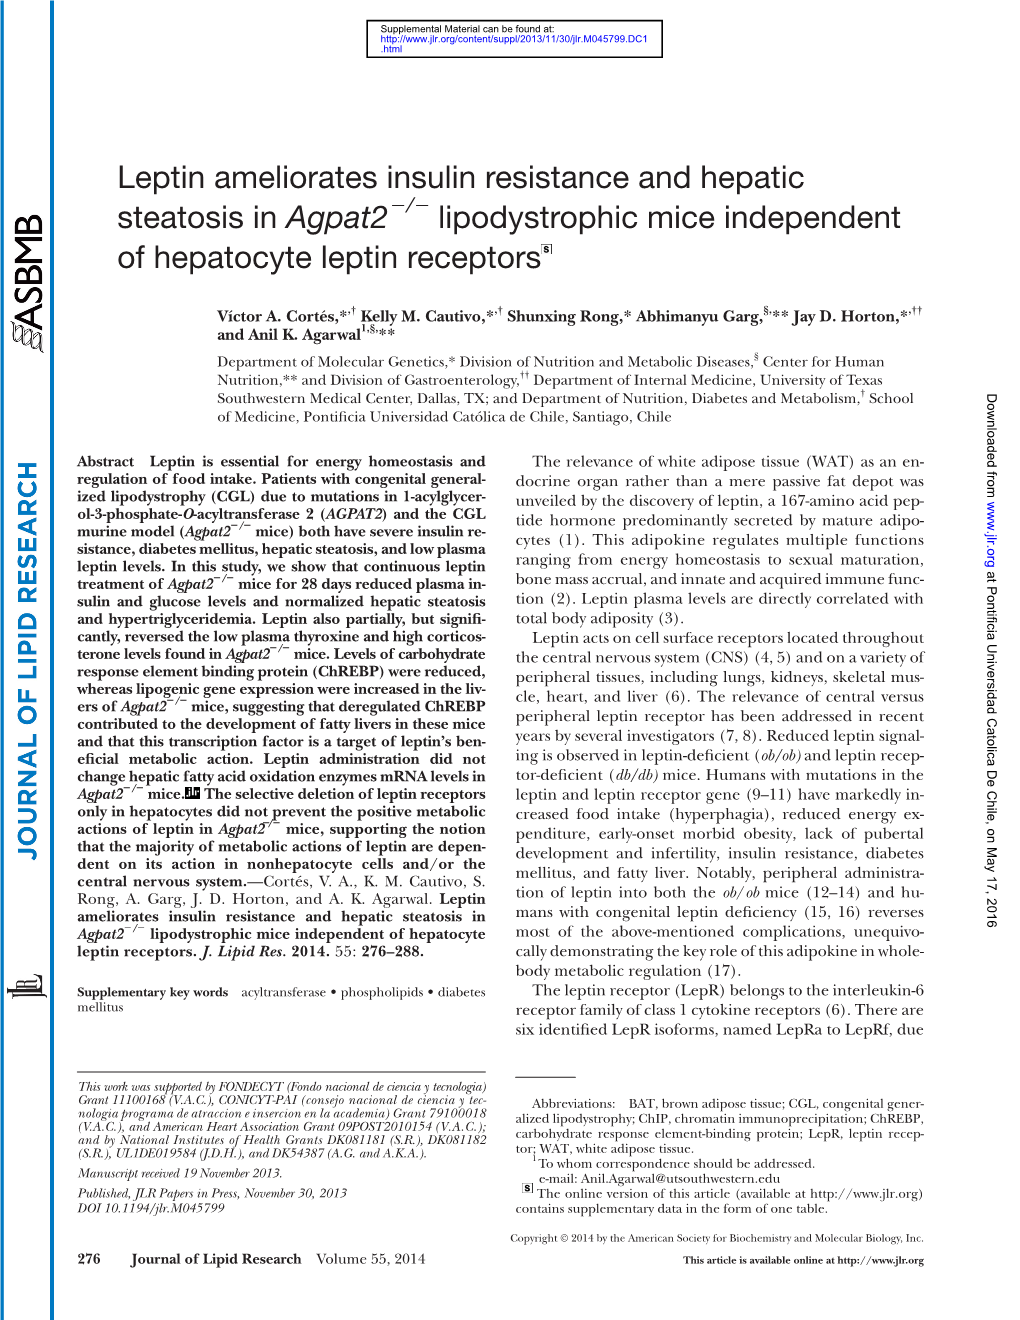 Leptin Ameliorates Insulin Resistance and Hepatic Steatosis in Agpat2 Lipodystrophic Mice Independent of Hepatocyte Leptin Rece